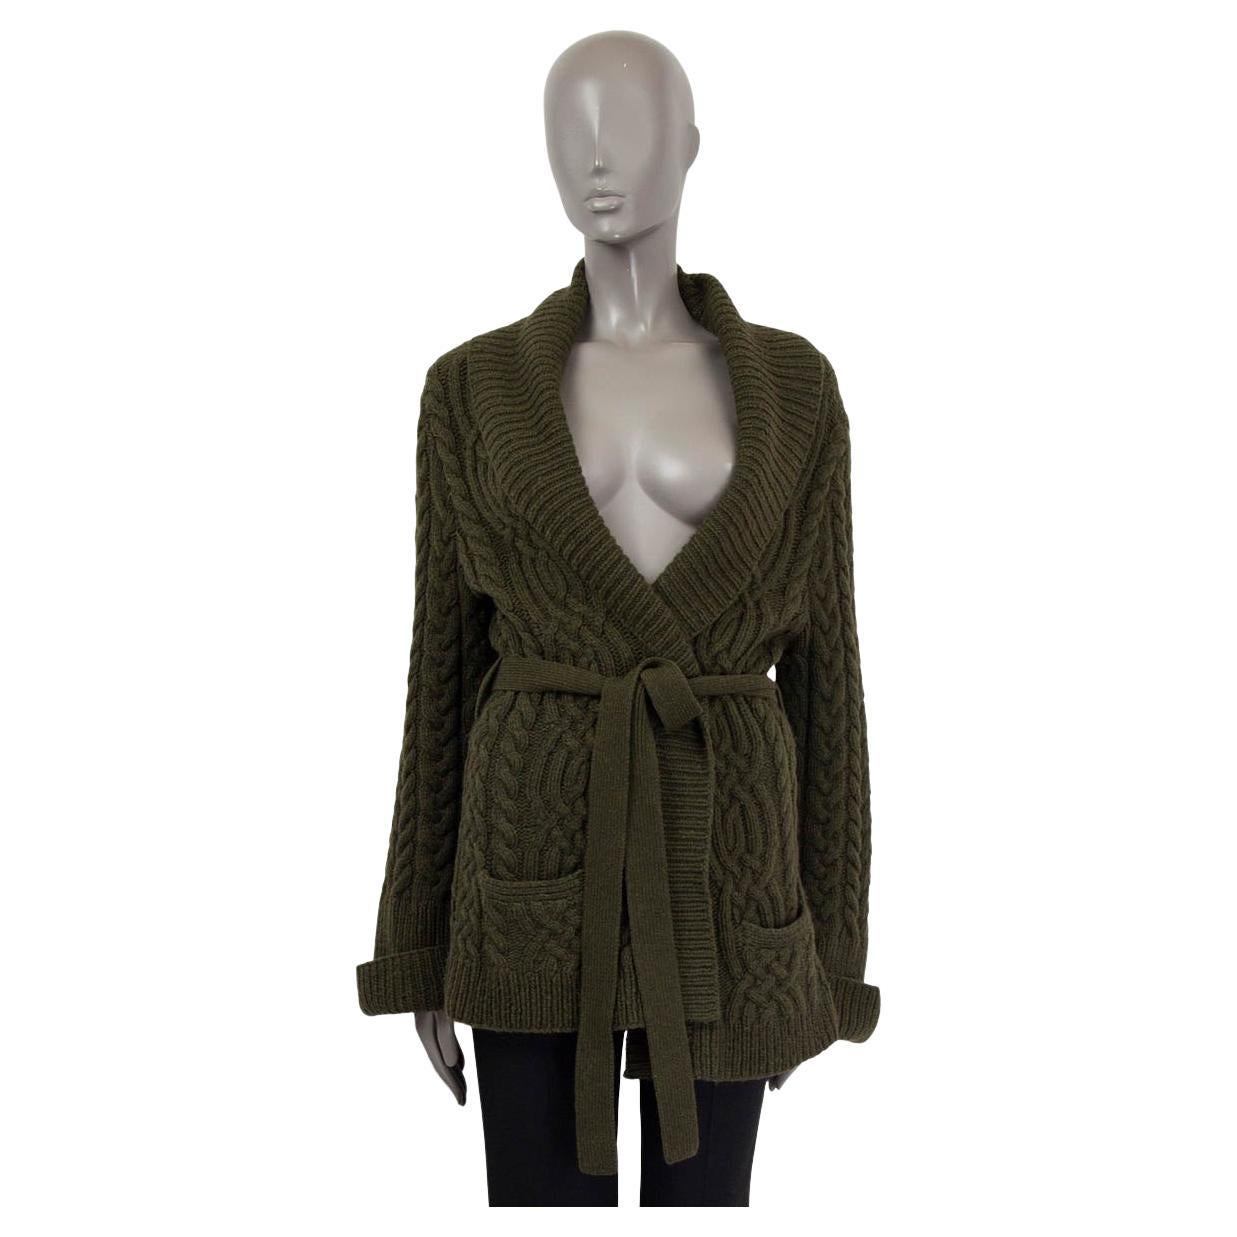 RALPH LAUREN olive green cashmere blend CABLE KNIT Cardigan Sweater XL